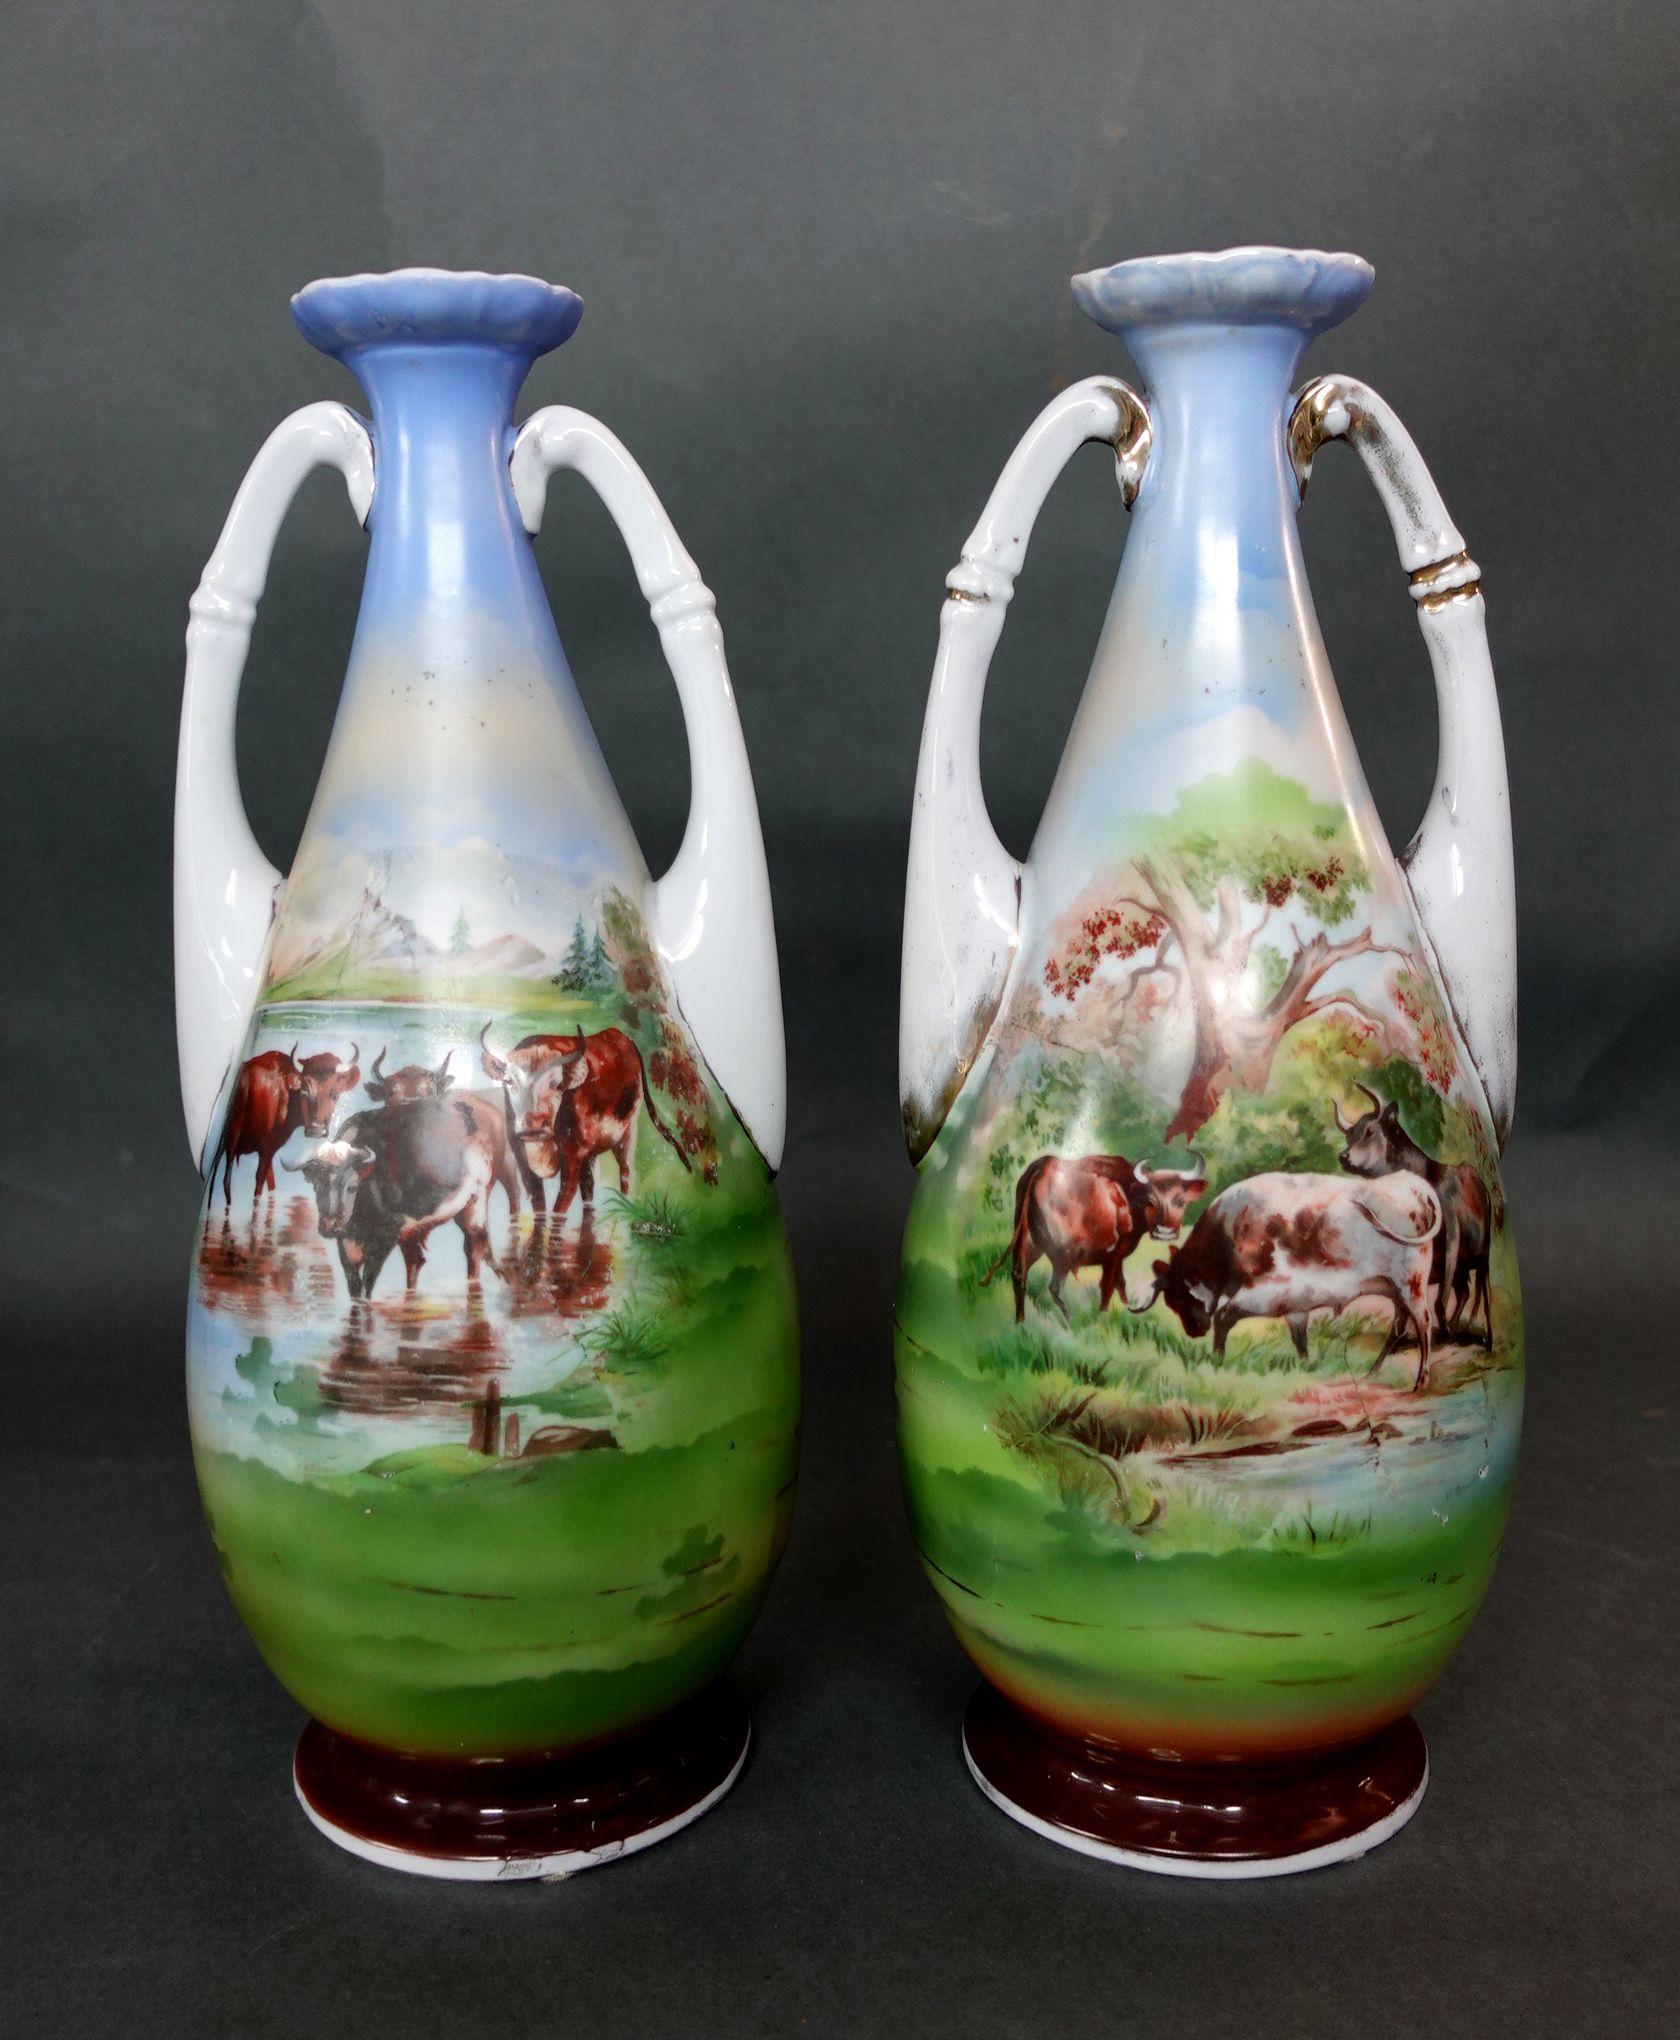 Antique 1890s pair of Victoria Austria vase. Comprising Austrian porcelain vases with hand-painted decorated scenes of cattle watering. Measure: Height 14 inches.
 